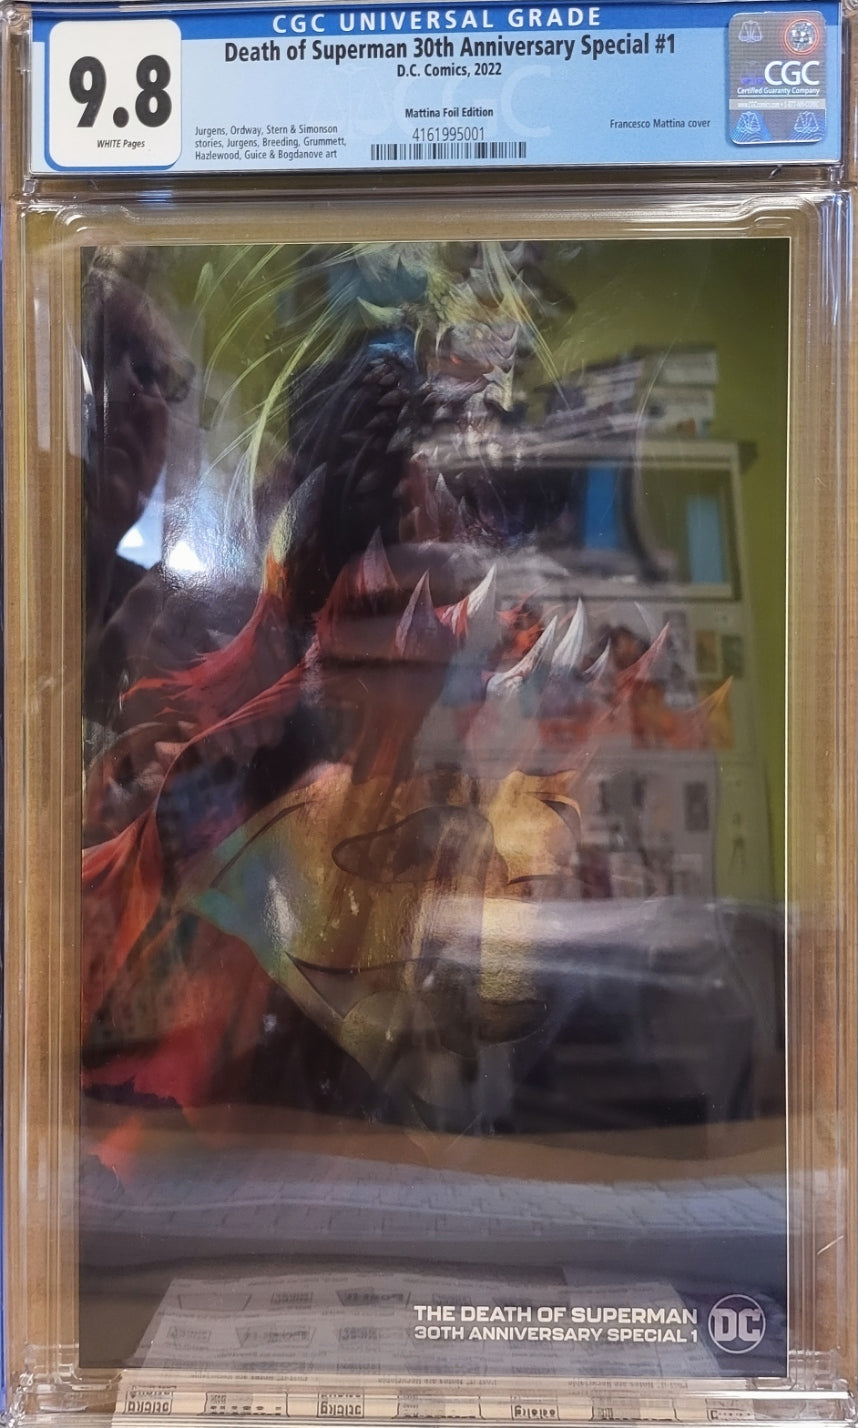 CGC 9.8 - Death of Superman 20th Anniversary Special #1 1:25 Foil